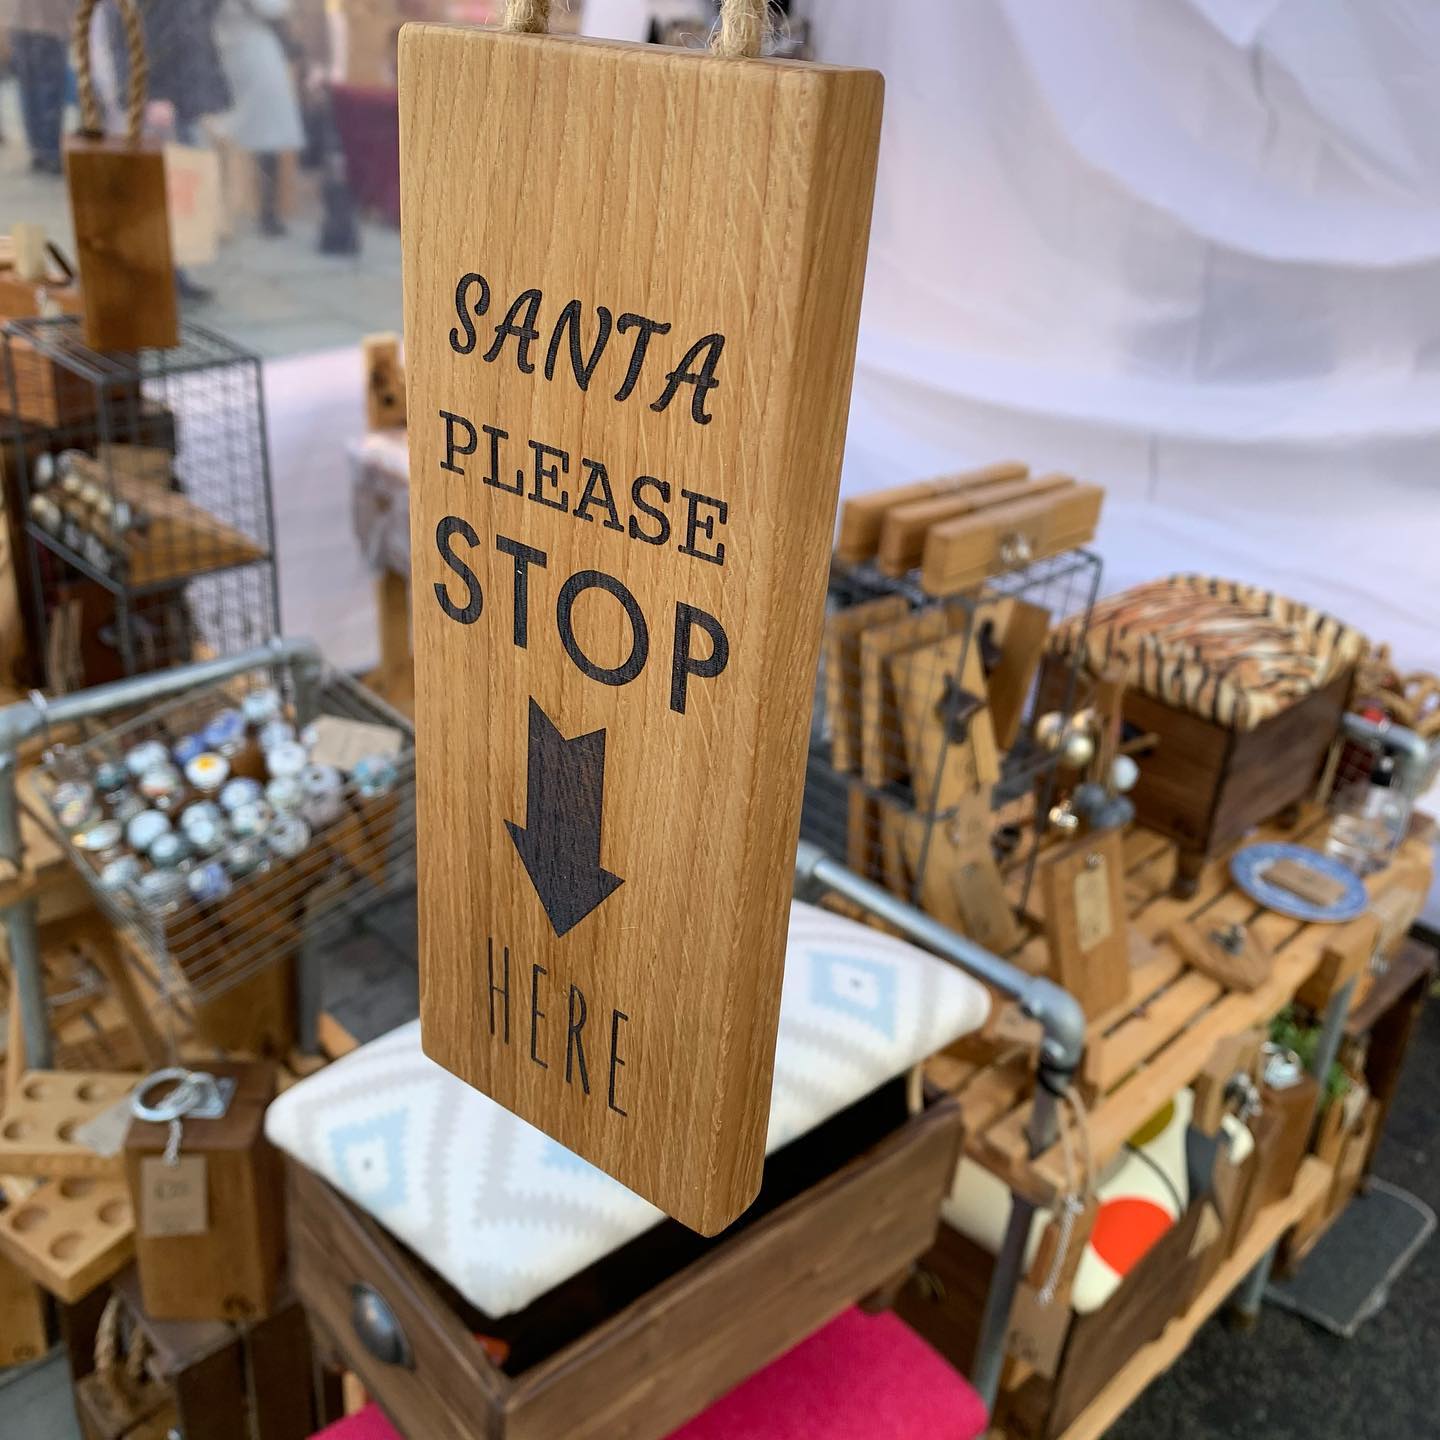 Our Santa signs are selling fast! Last chance to purchase one in time for Christmas is this weekend due to postage times.  they’re now reduced to £8.99 inc postage! ...#Santa #fatherchristmas #personalised #handcrafted #homewares #reindeer #festivesign #santastophere #bathatchristmas